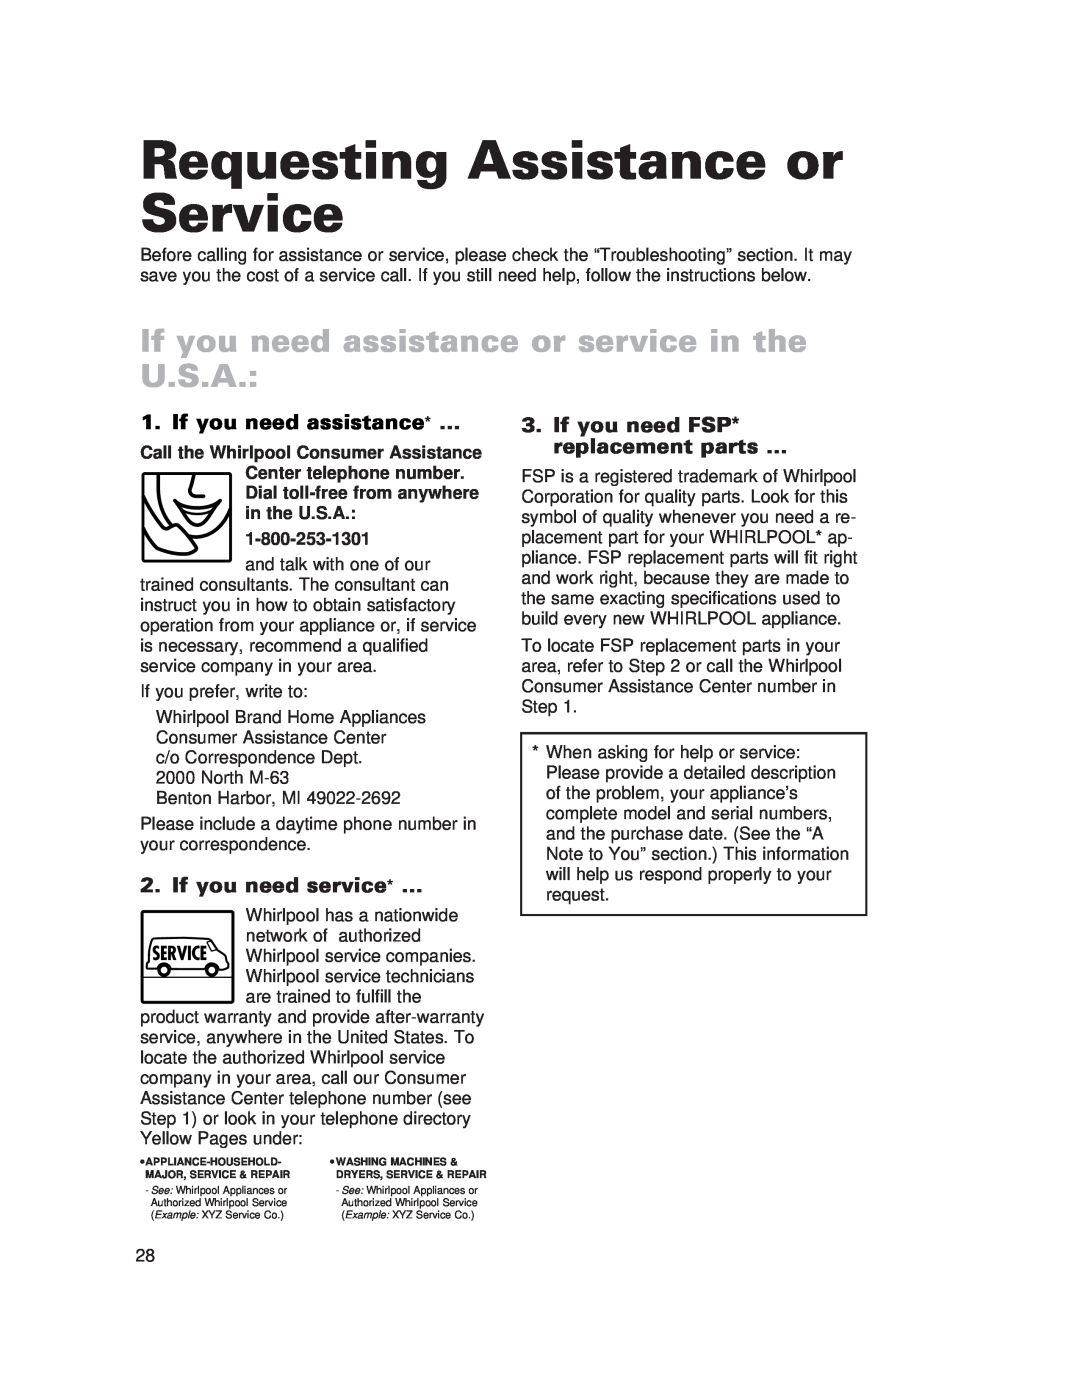 Whirlpool 980 Requesting Assistance or Service, If you need assistance or service in the U.S.A, If you need assistance* … 